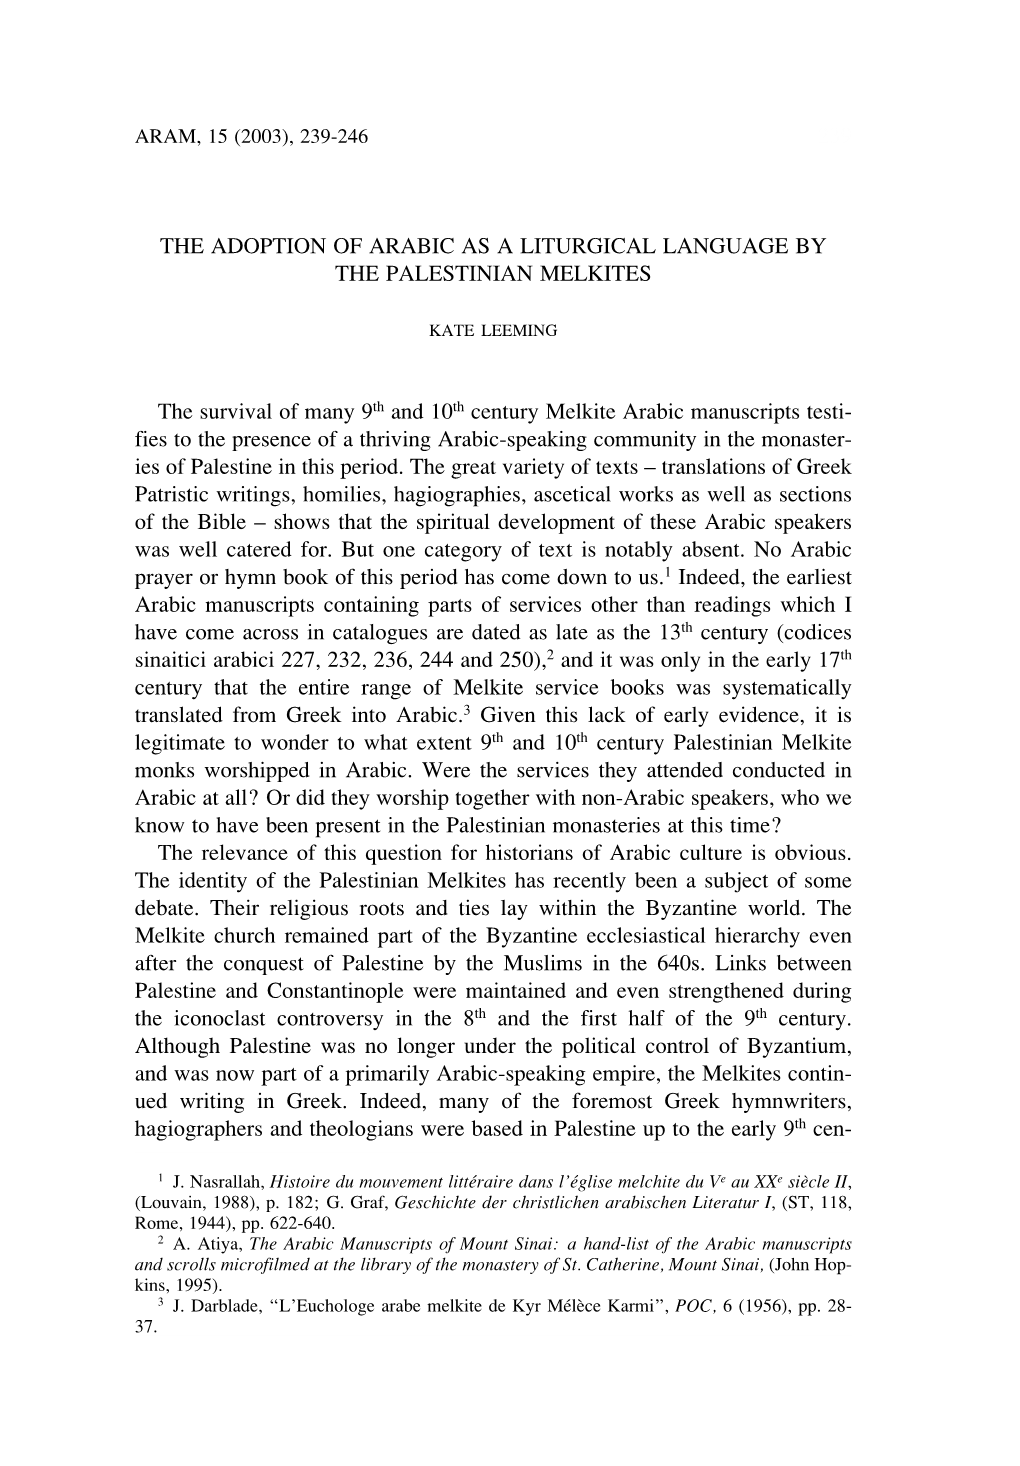 THE ADOPTION of ARABIC AS a LITURGICAL LANGUAGE by the PALESTINIAN MELKITES the Survival of Many 9Th and 10Th Century Melkite Ar